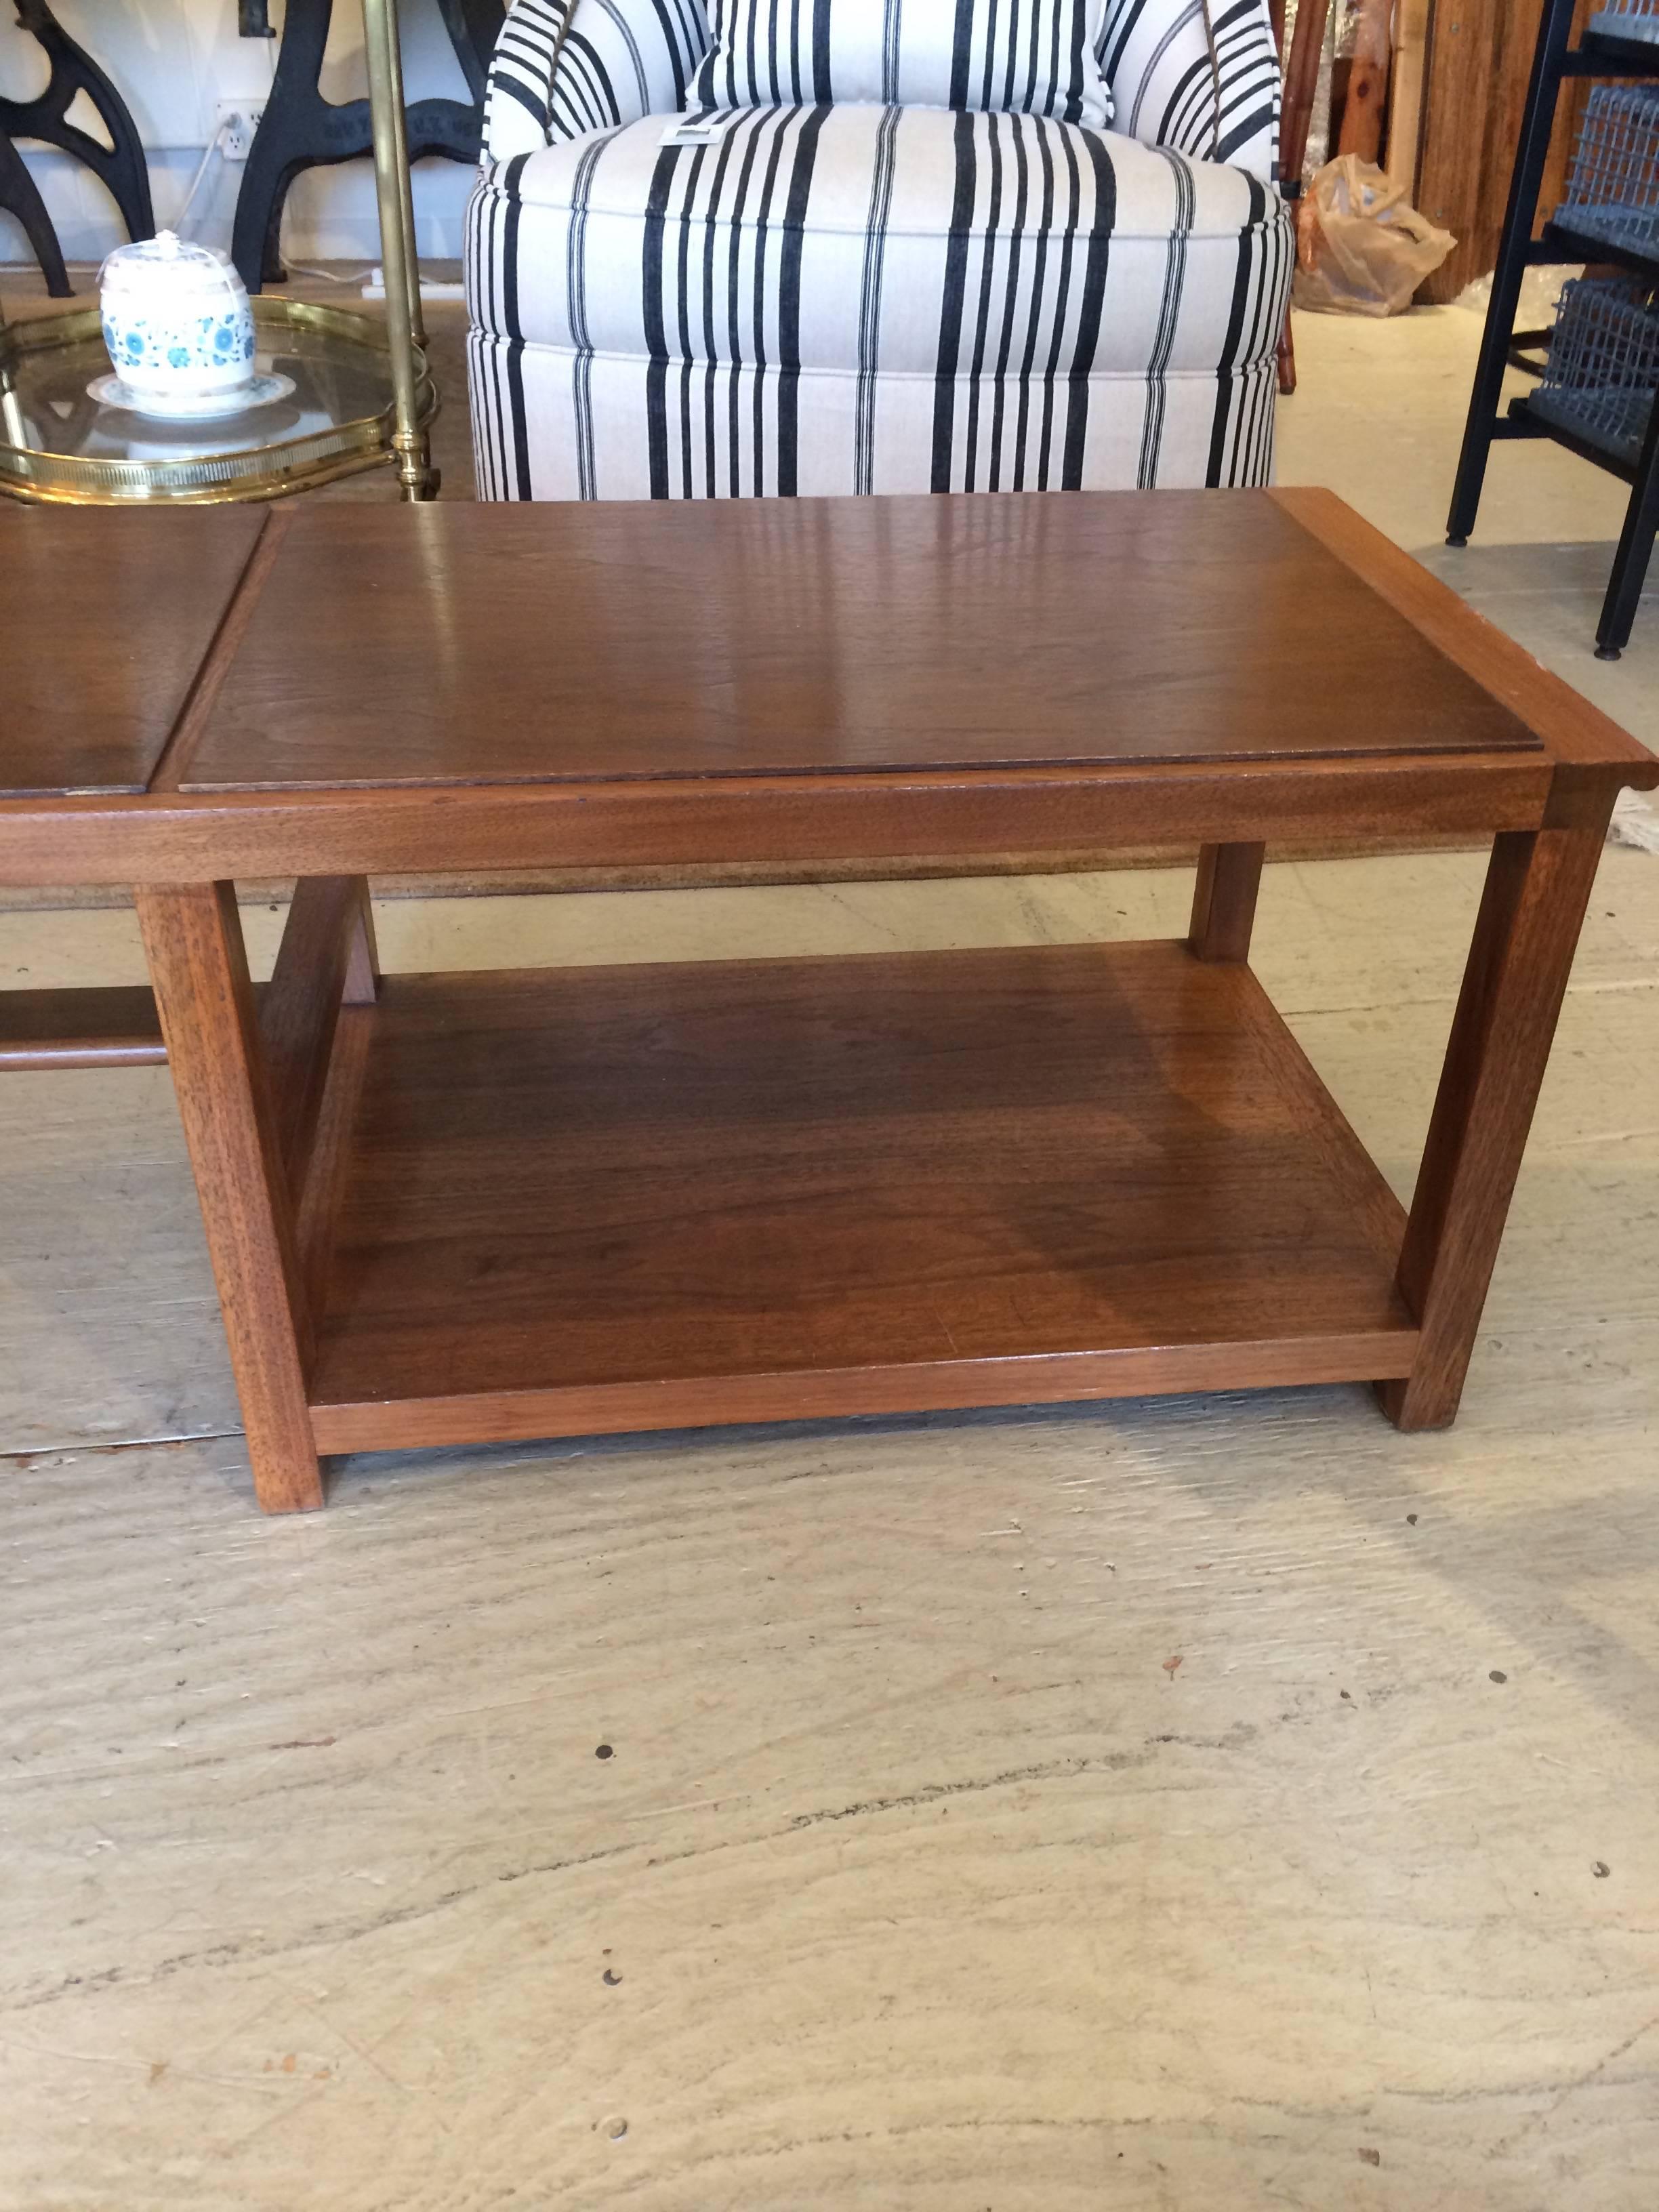 Unusual long rectangular very sophisticated asymmetrical two-tone walnut coffee table having 1/3 of the coffee table with a second underneath shelf, while the rest is airy with a single stretcher bar. Dunbar label underside.

SC